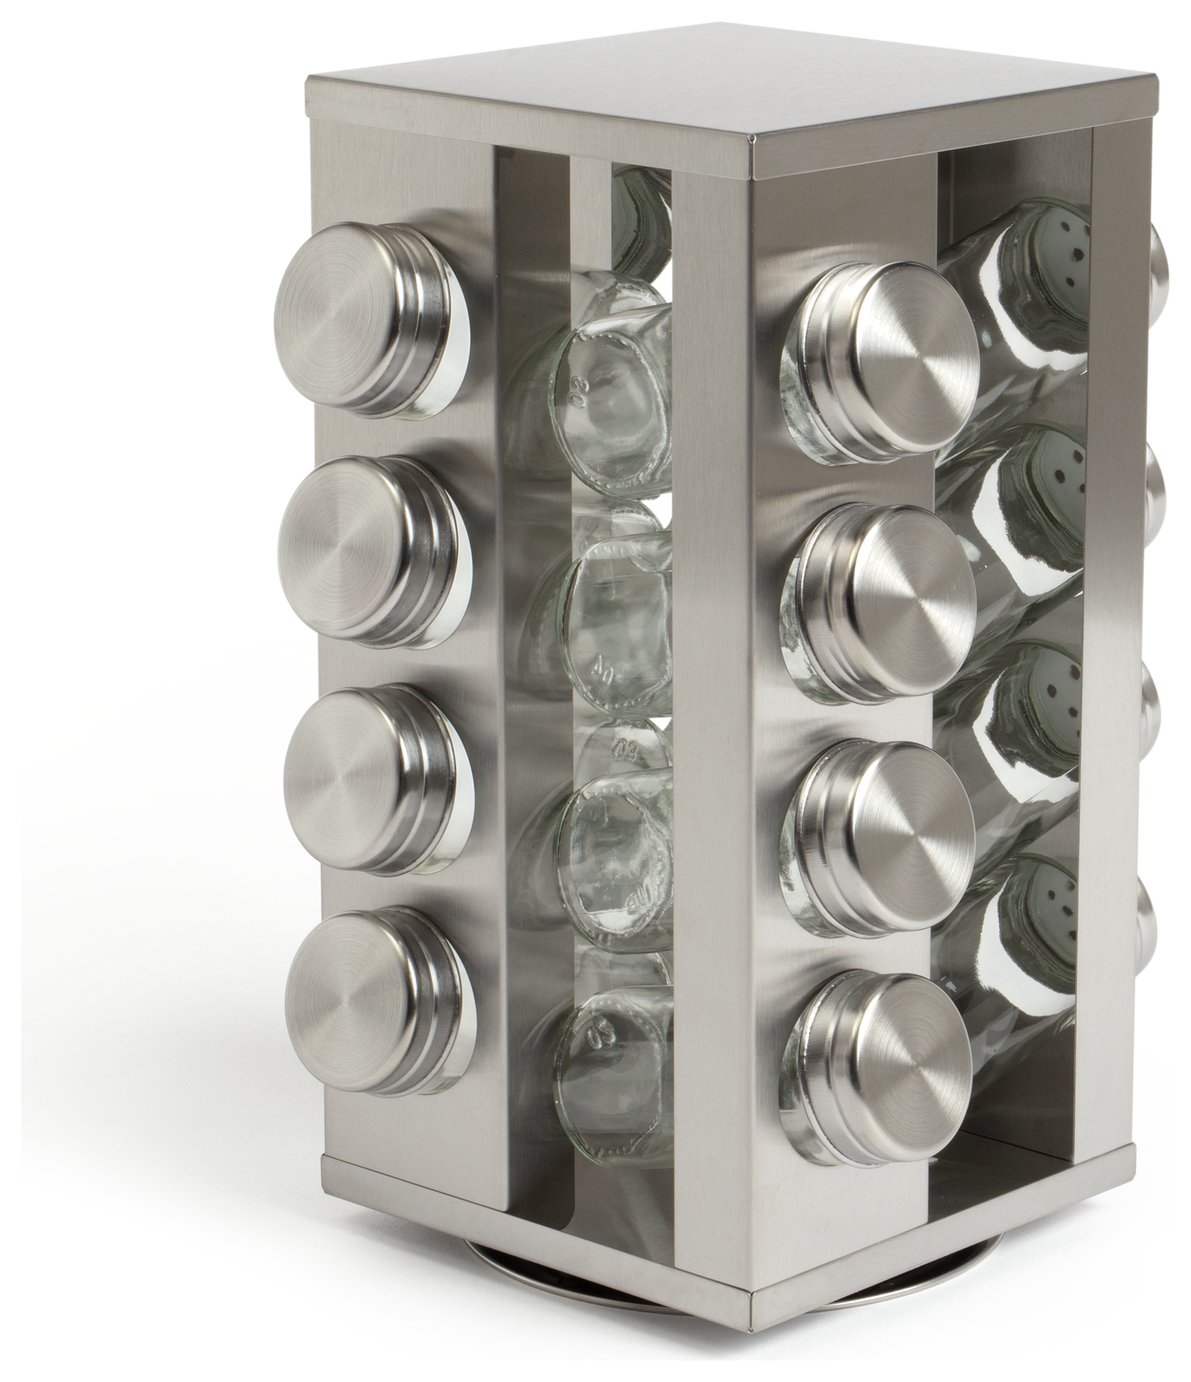 Argos Home 16 Jar Stainless Steel Revolving Spice Rack review